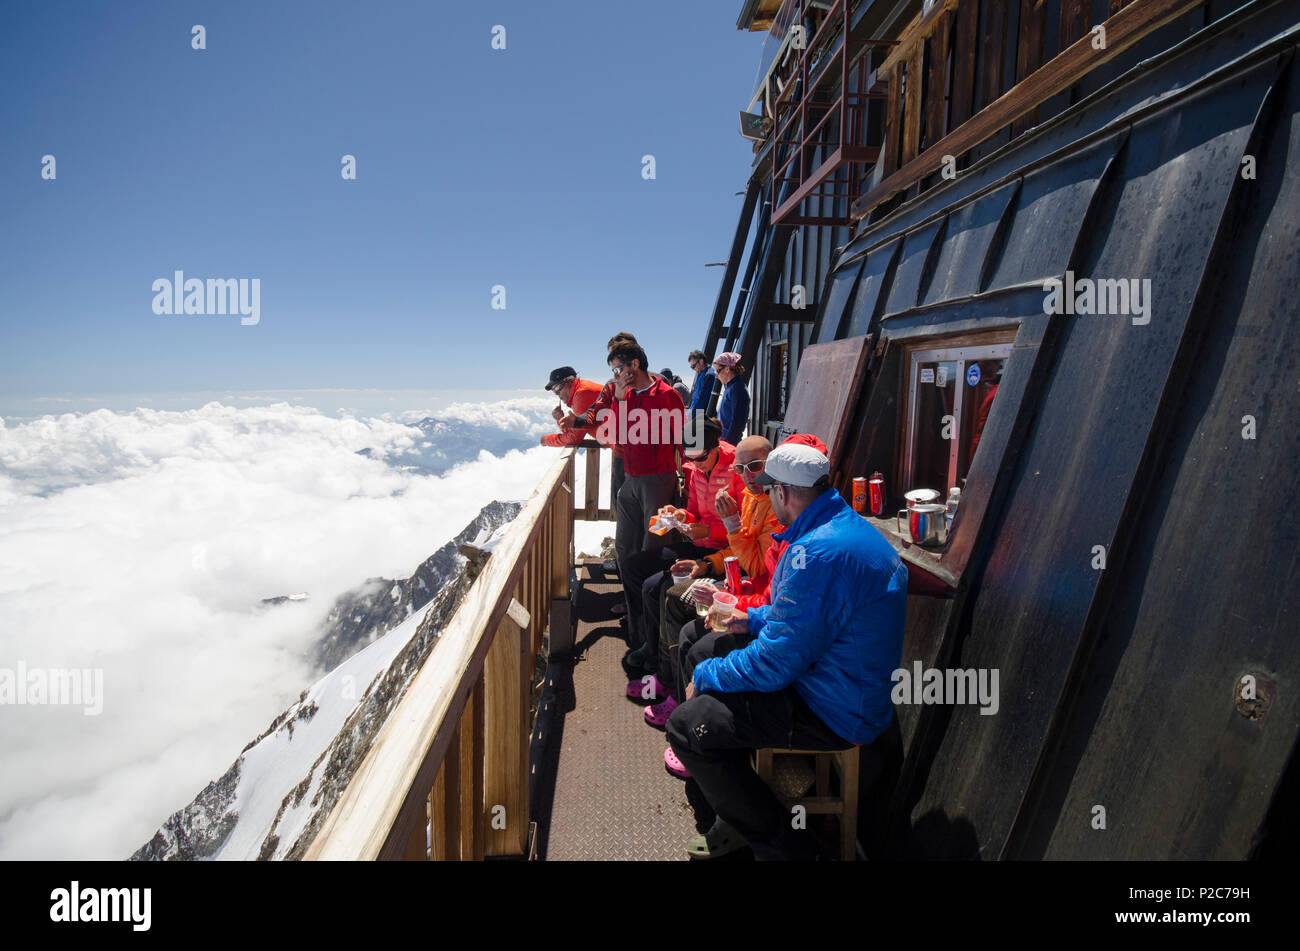 Alpinists in front of the Margherita Hut on the summit of the 4554 meter high Signalkuppe or Punta Gnifetti, highest hut in the Stock Photo